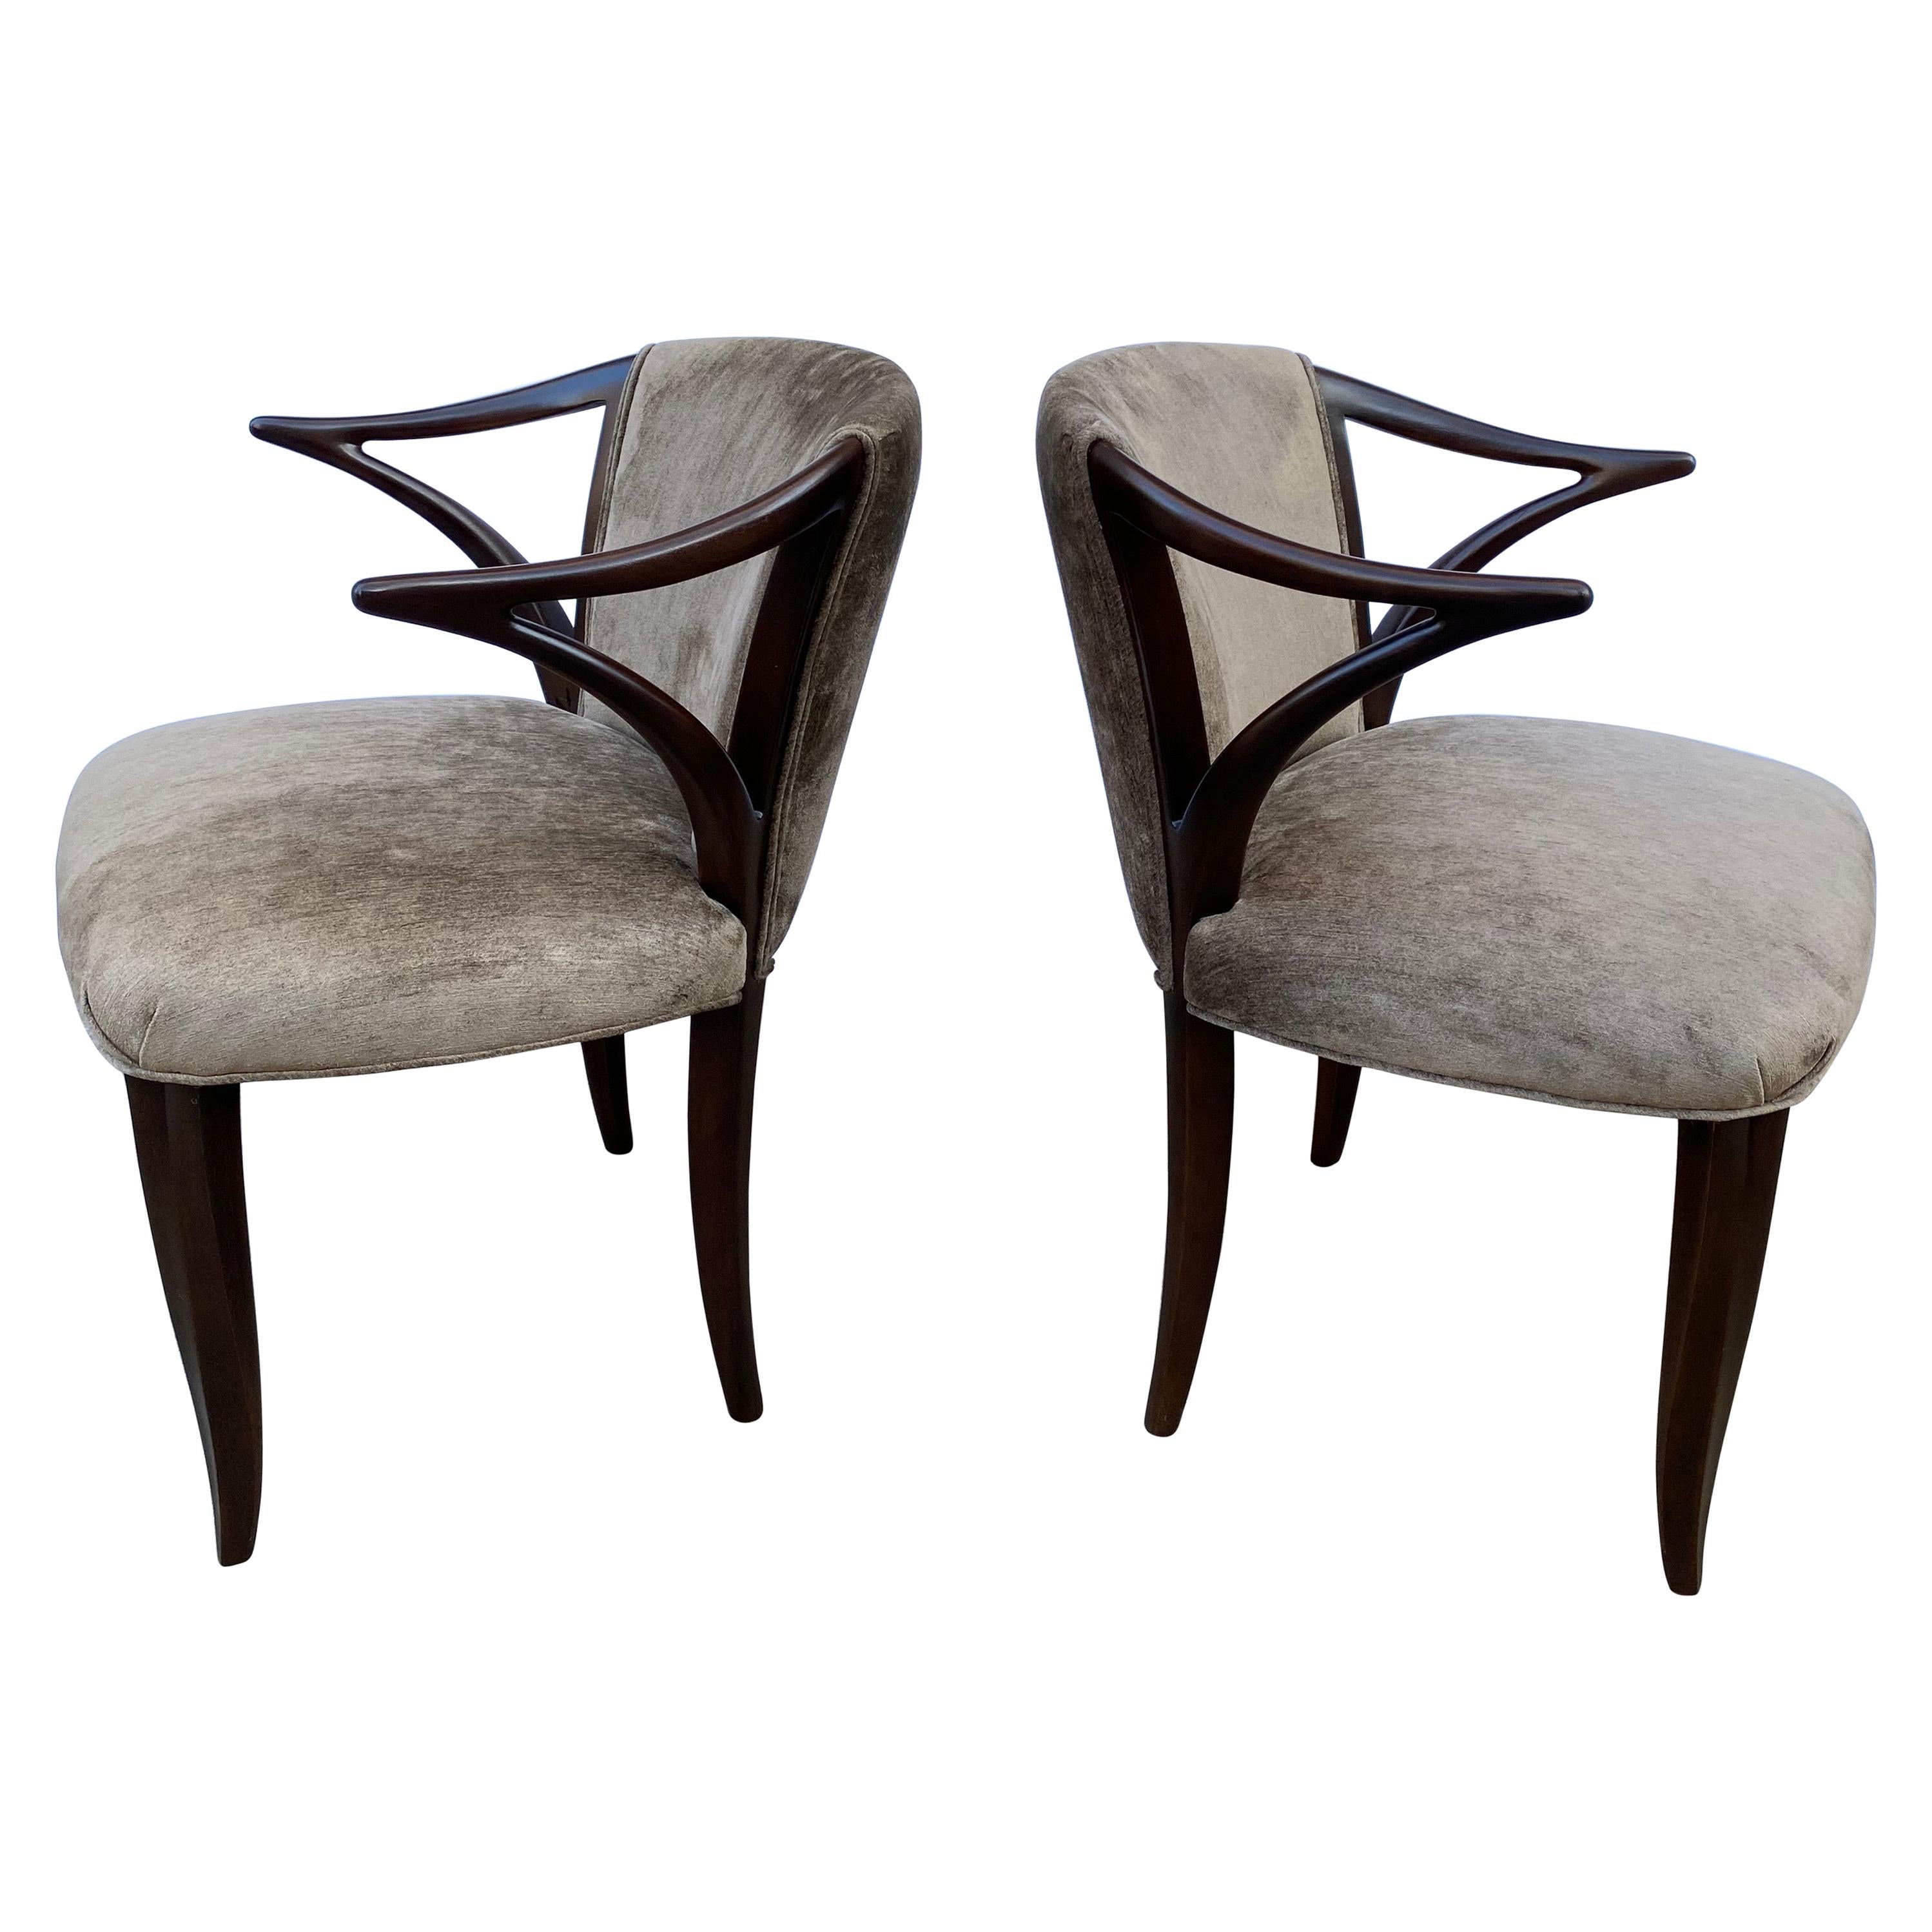 Details about   Edward Wormley for Dunbar Janus Collection Leather and Mahogany Armchairs Pair 